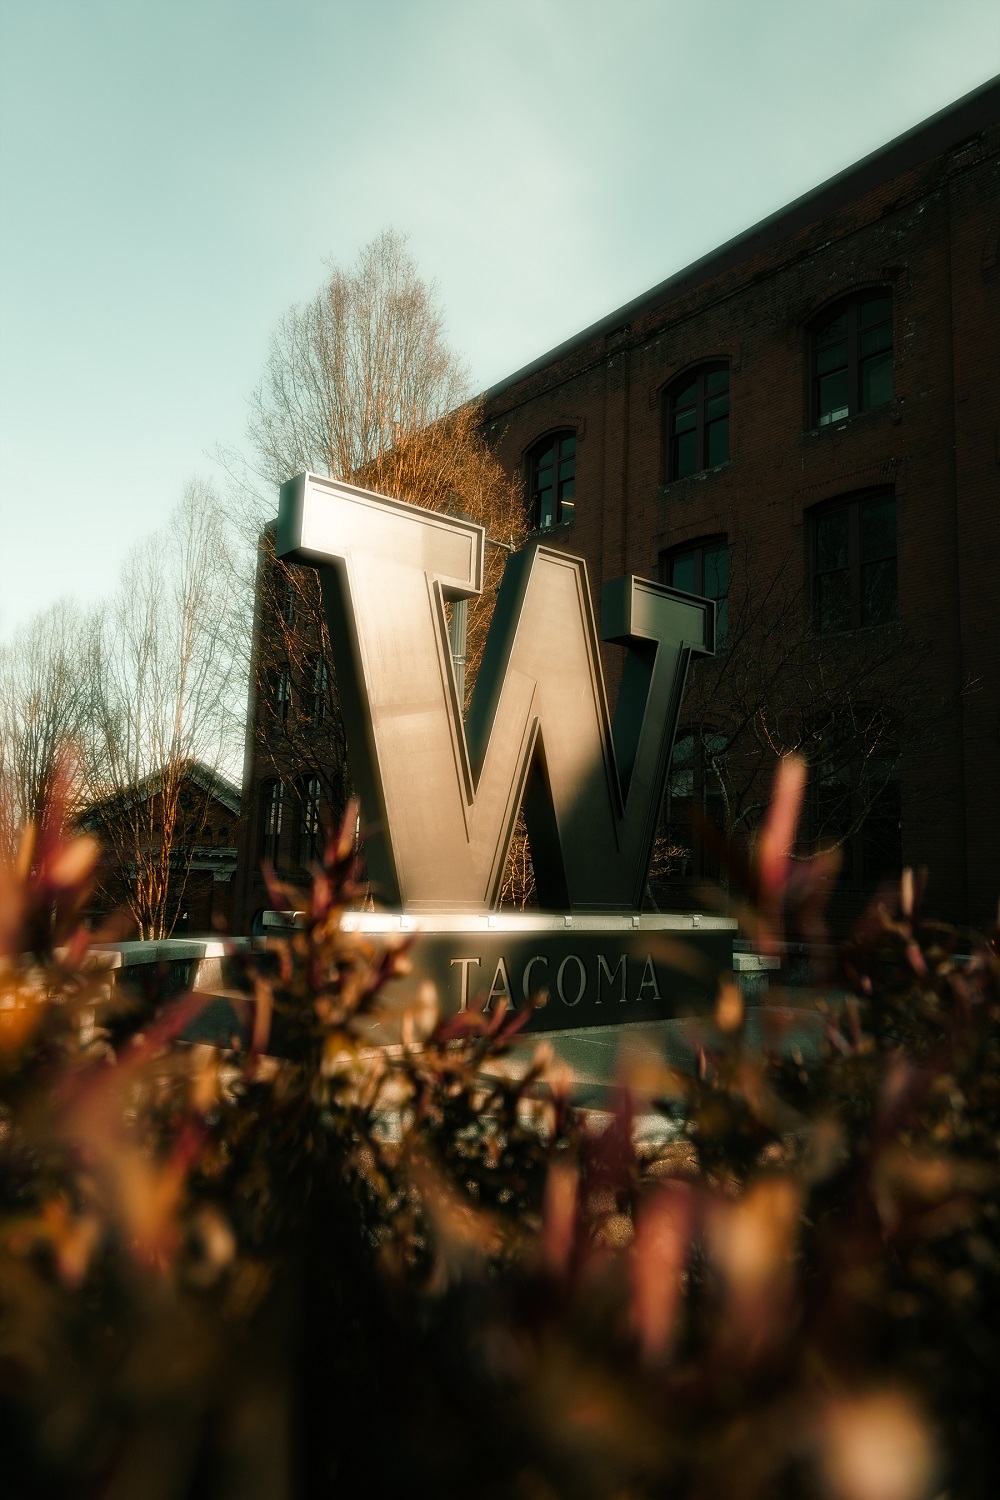 The UW Tacoma "W" statue. The leaves of a bush sit in front and the Tioga building can be seen behind the "W."